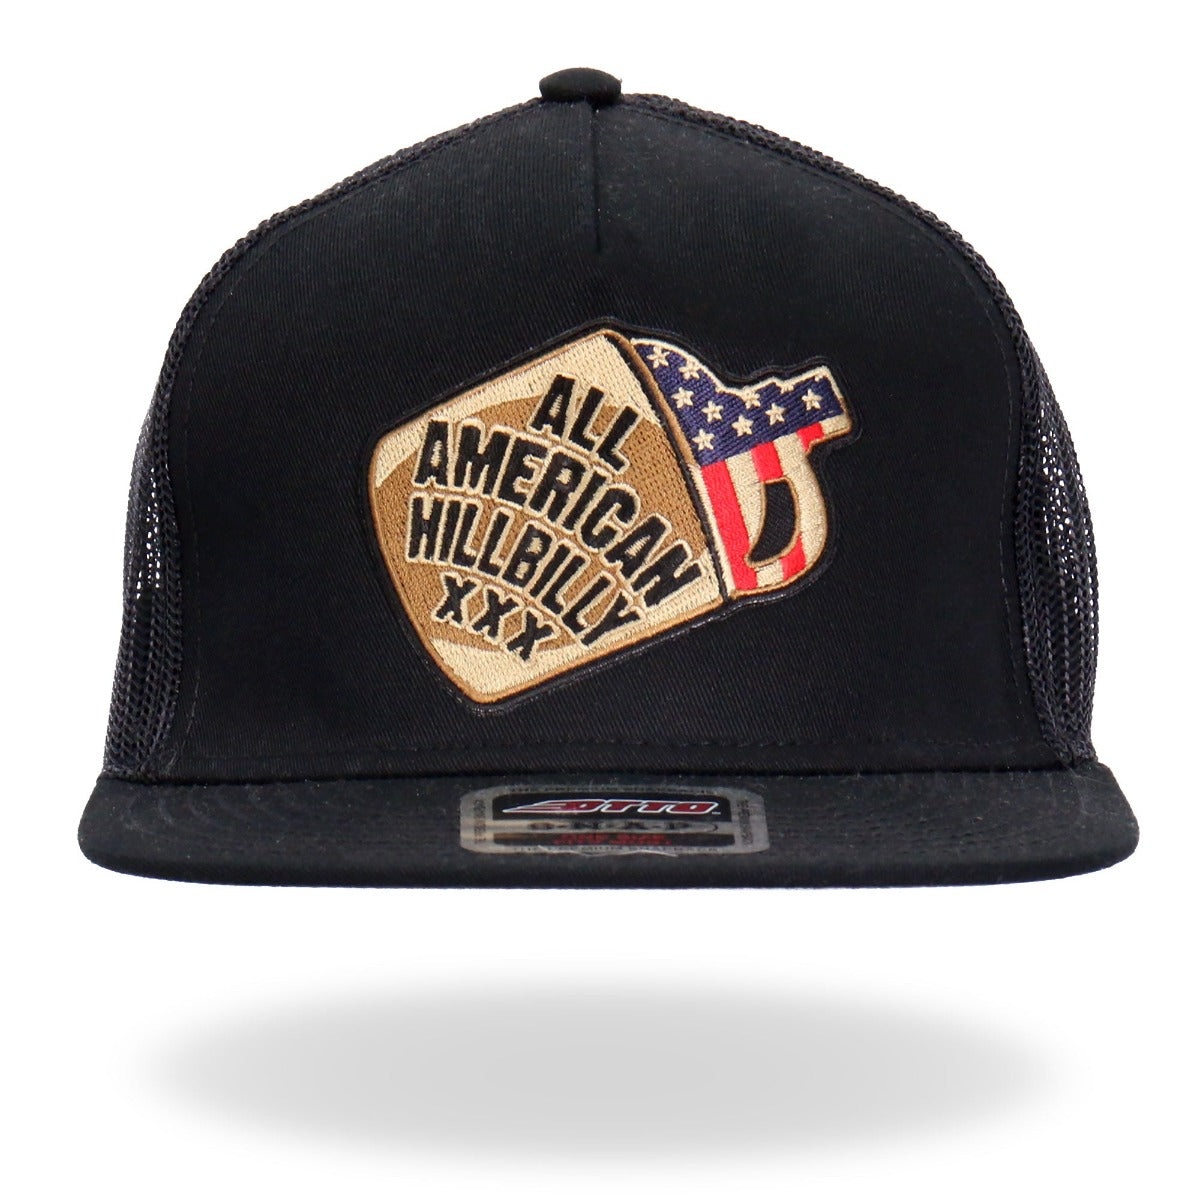 Hot Leathers Men's All American Hilbilly Snapback